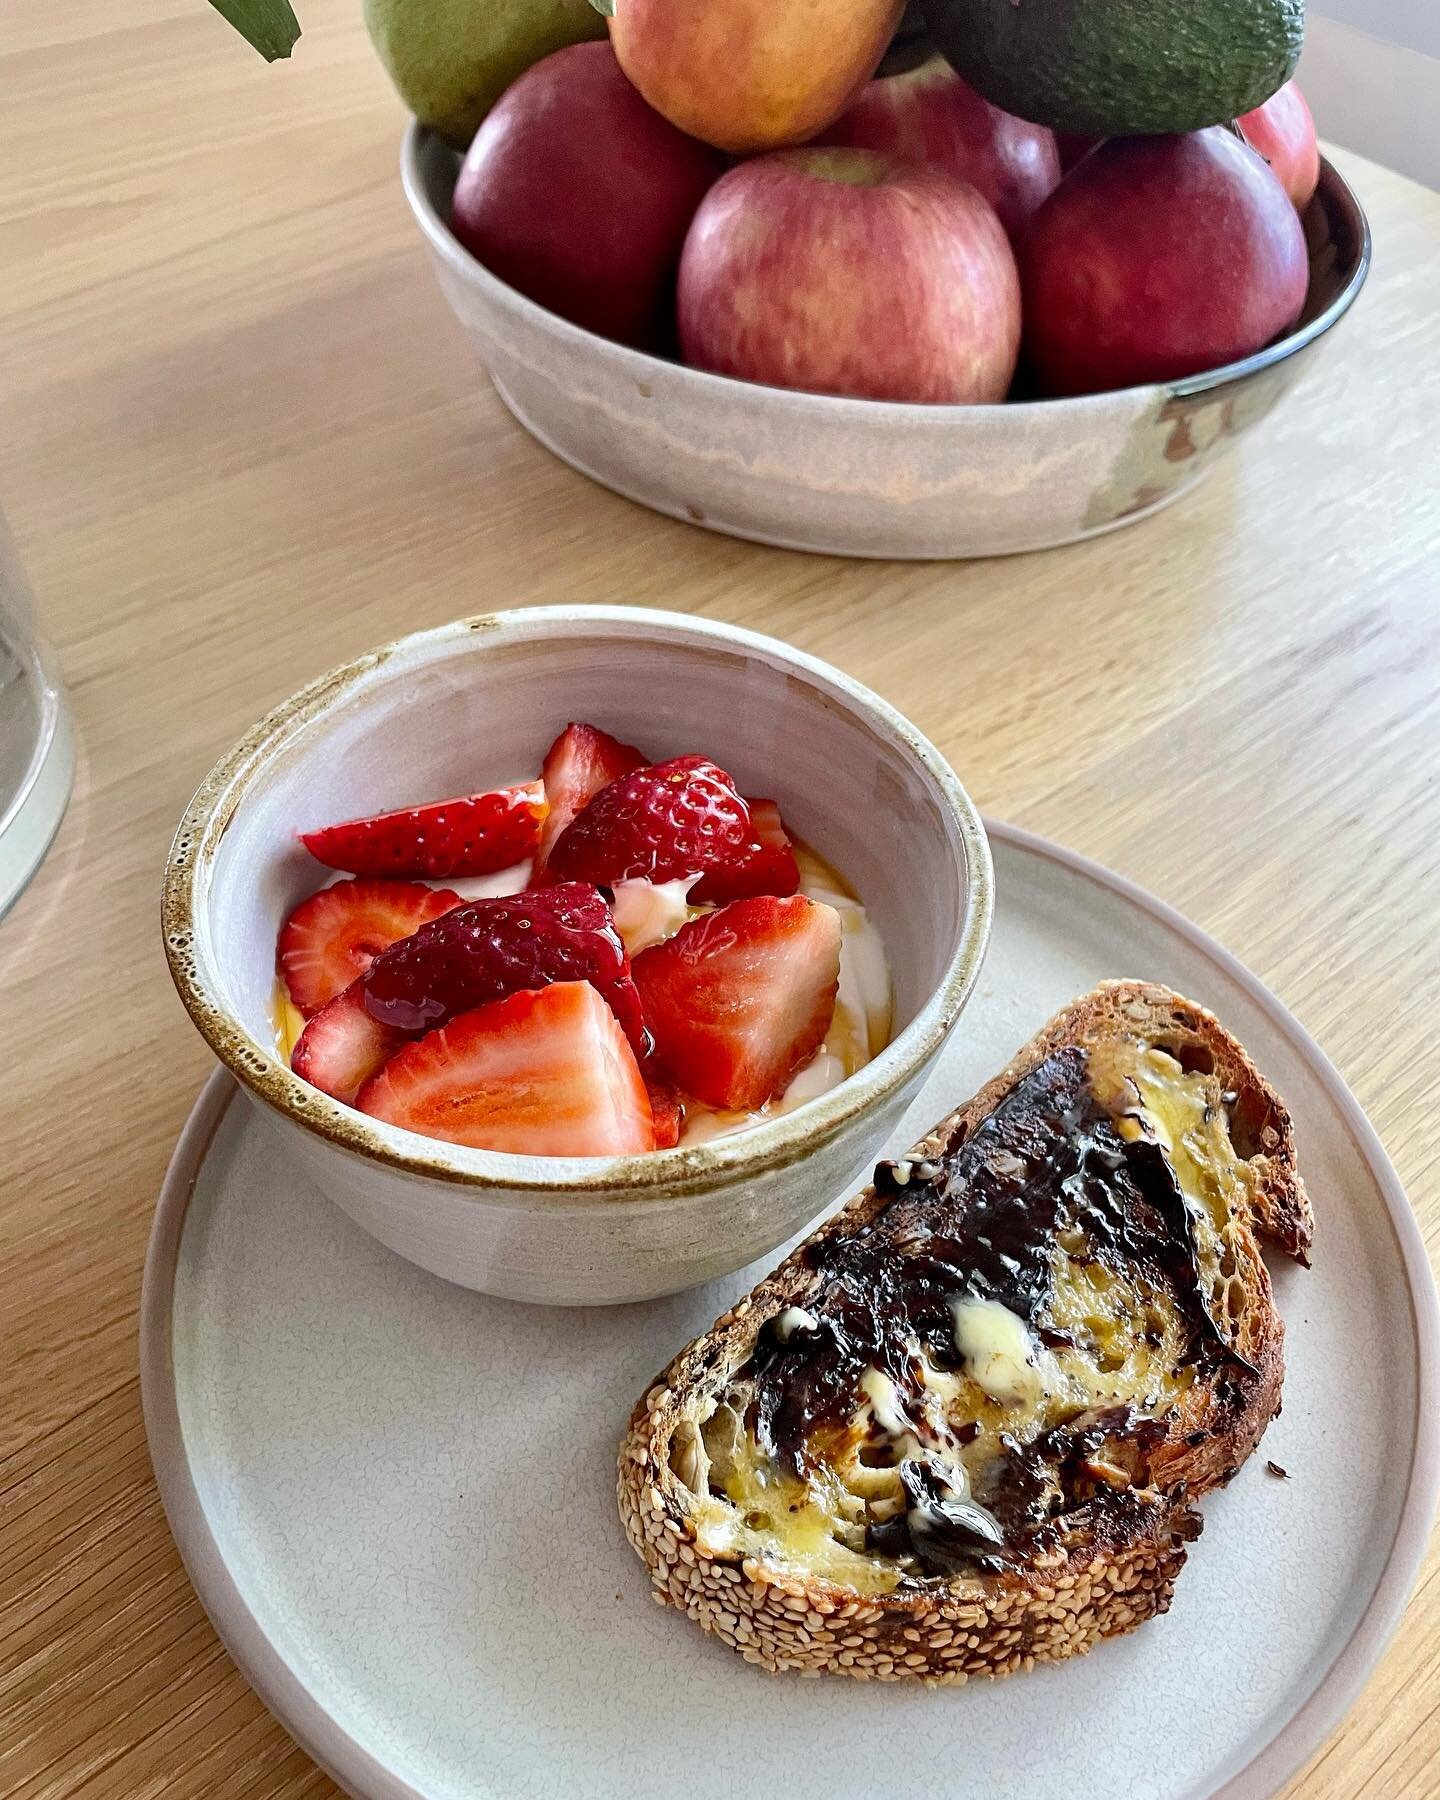 Vegemite on toast craving, satisfied! 😋 
Does anyone else also have the need to have something sweet with or after a meal? I like to call it breakfast dessert 😉